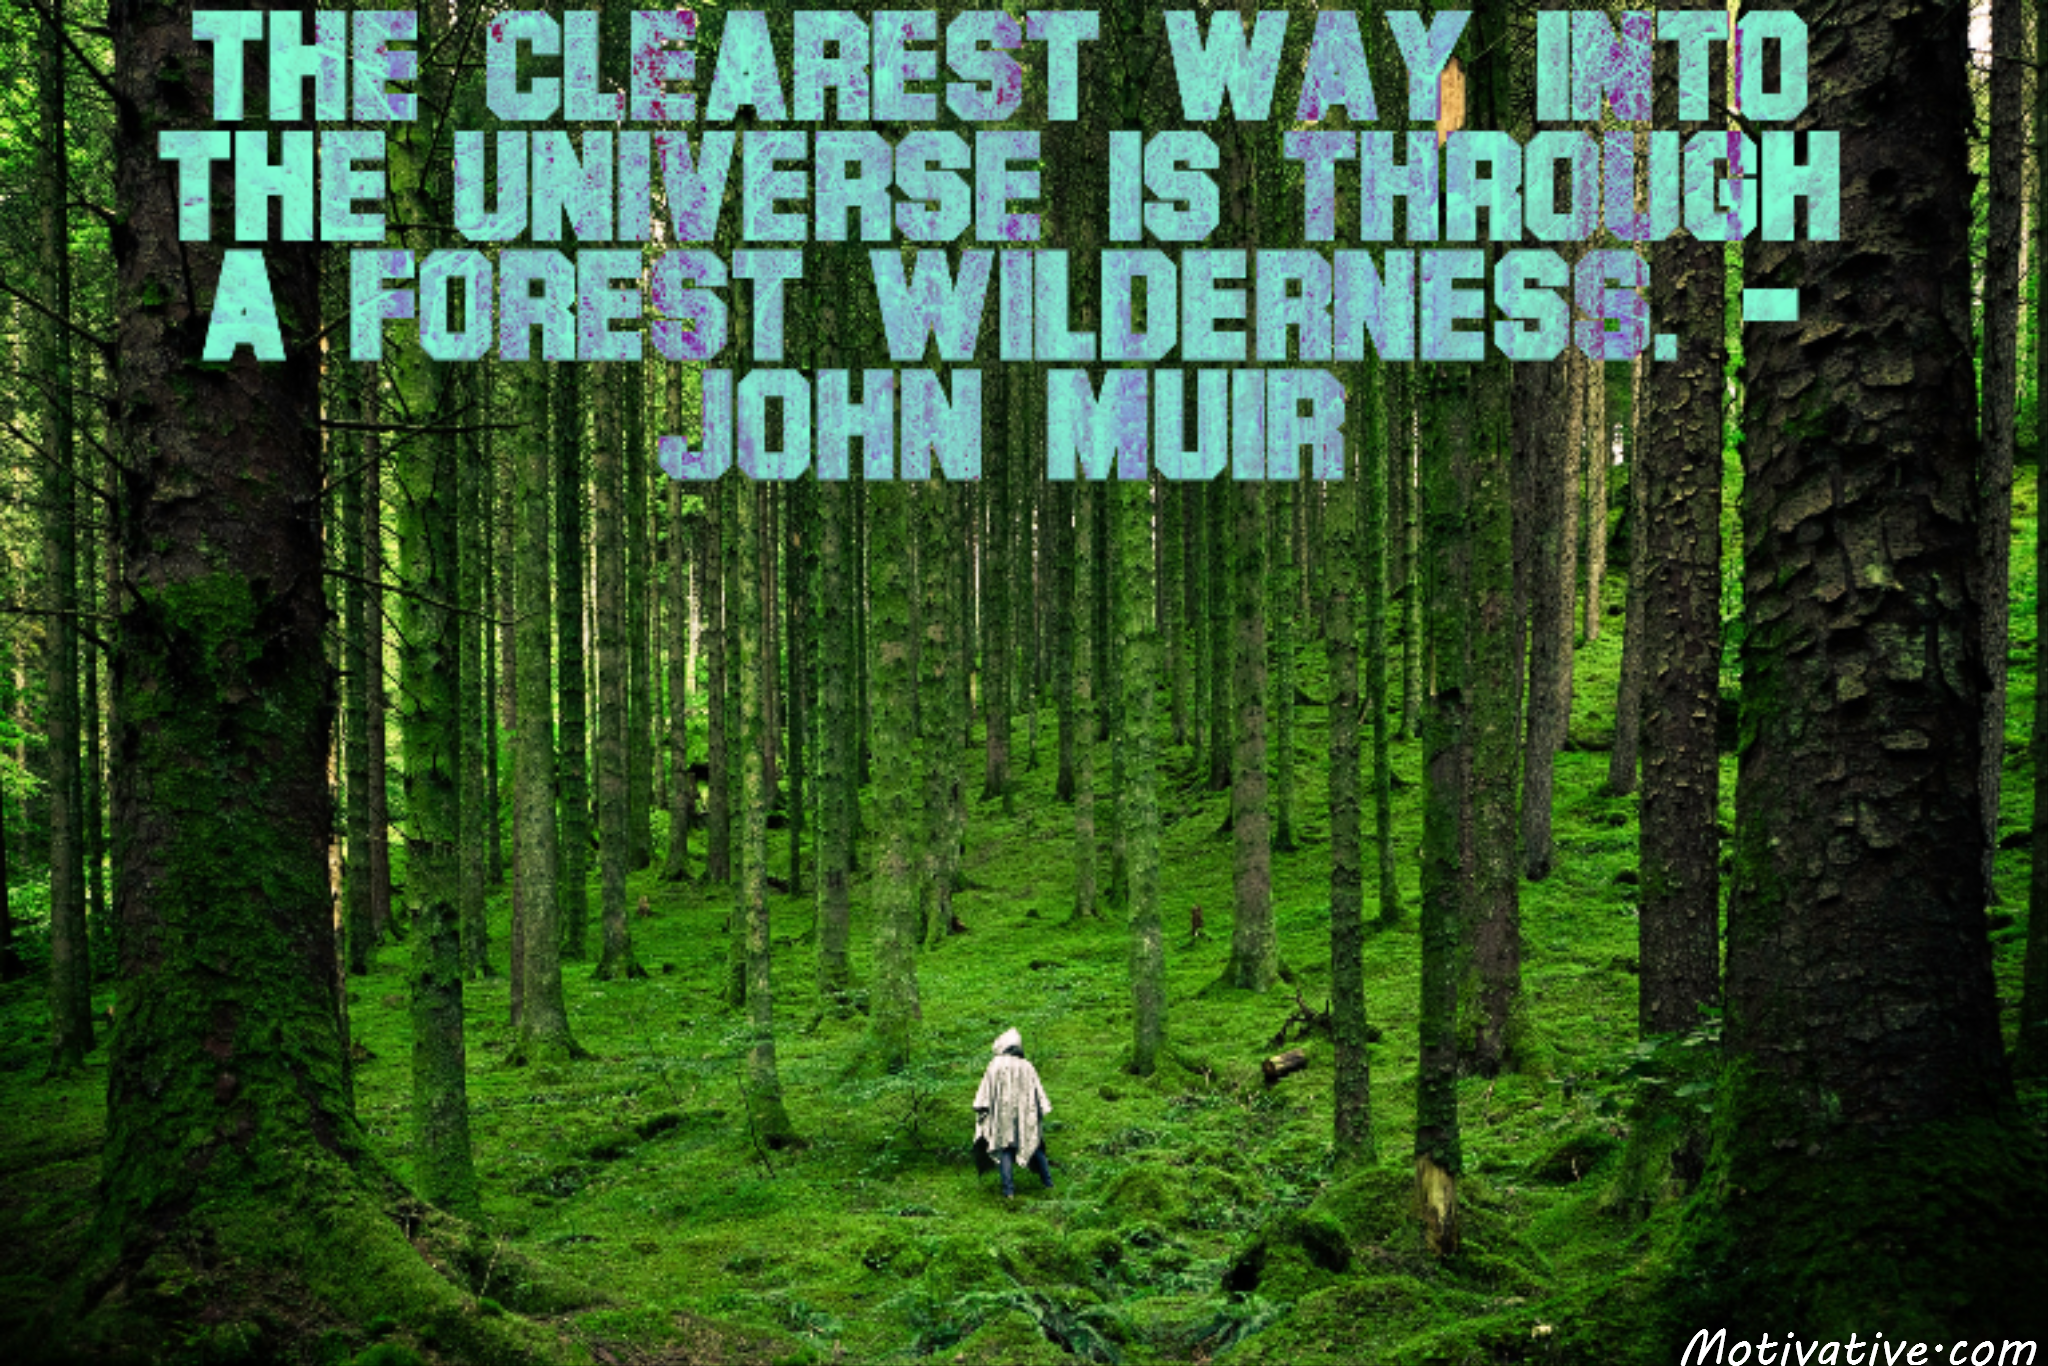 The clearest way into the Universe is through a forest wilderness. – John Muir